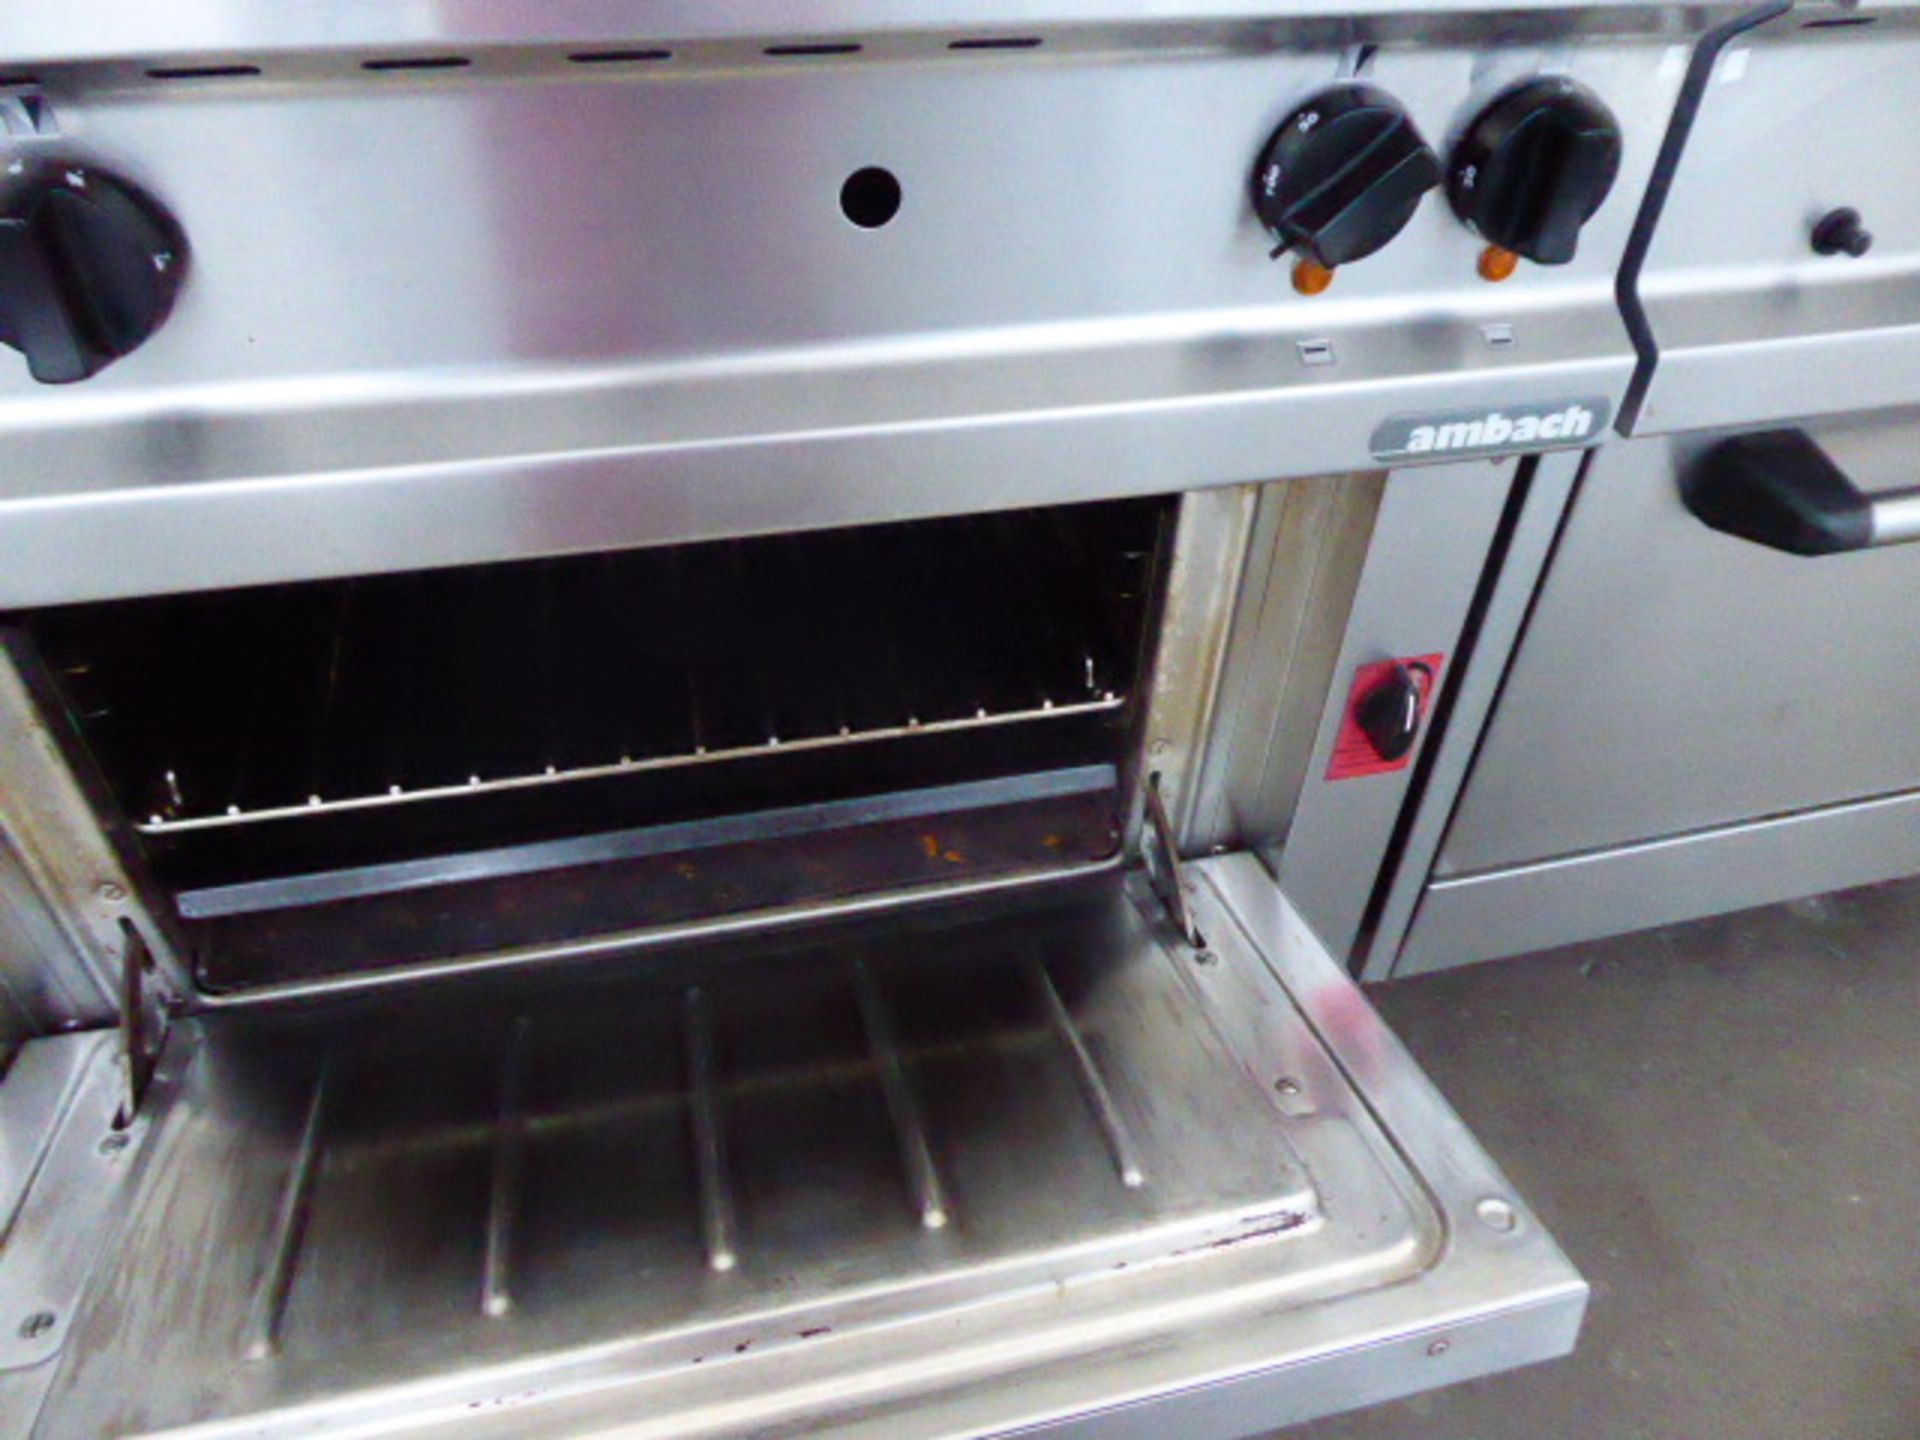 80cm gas Ambach solid top cooker with large oven under and chimney - Image 2 of 2